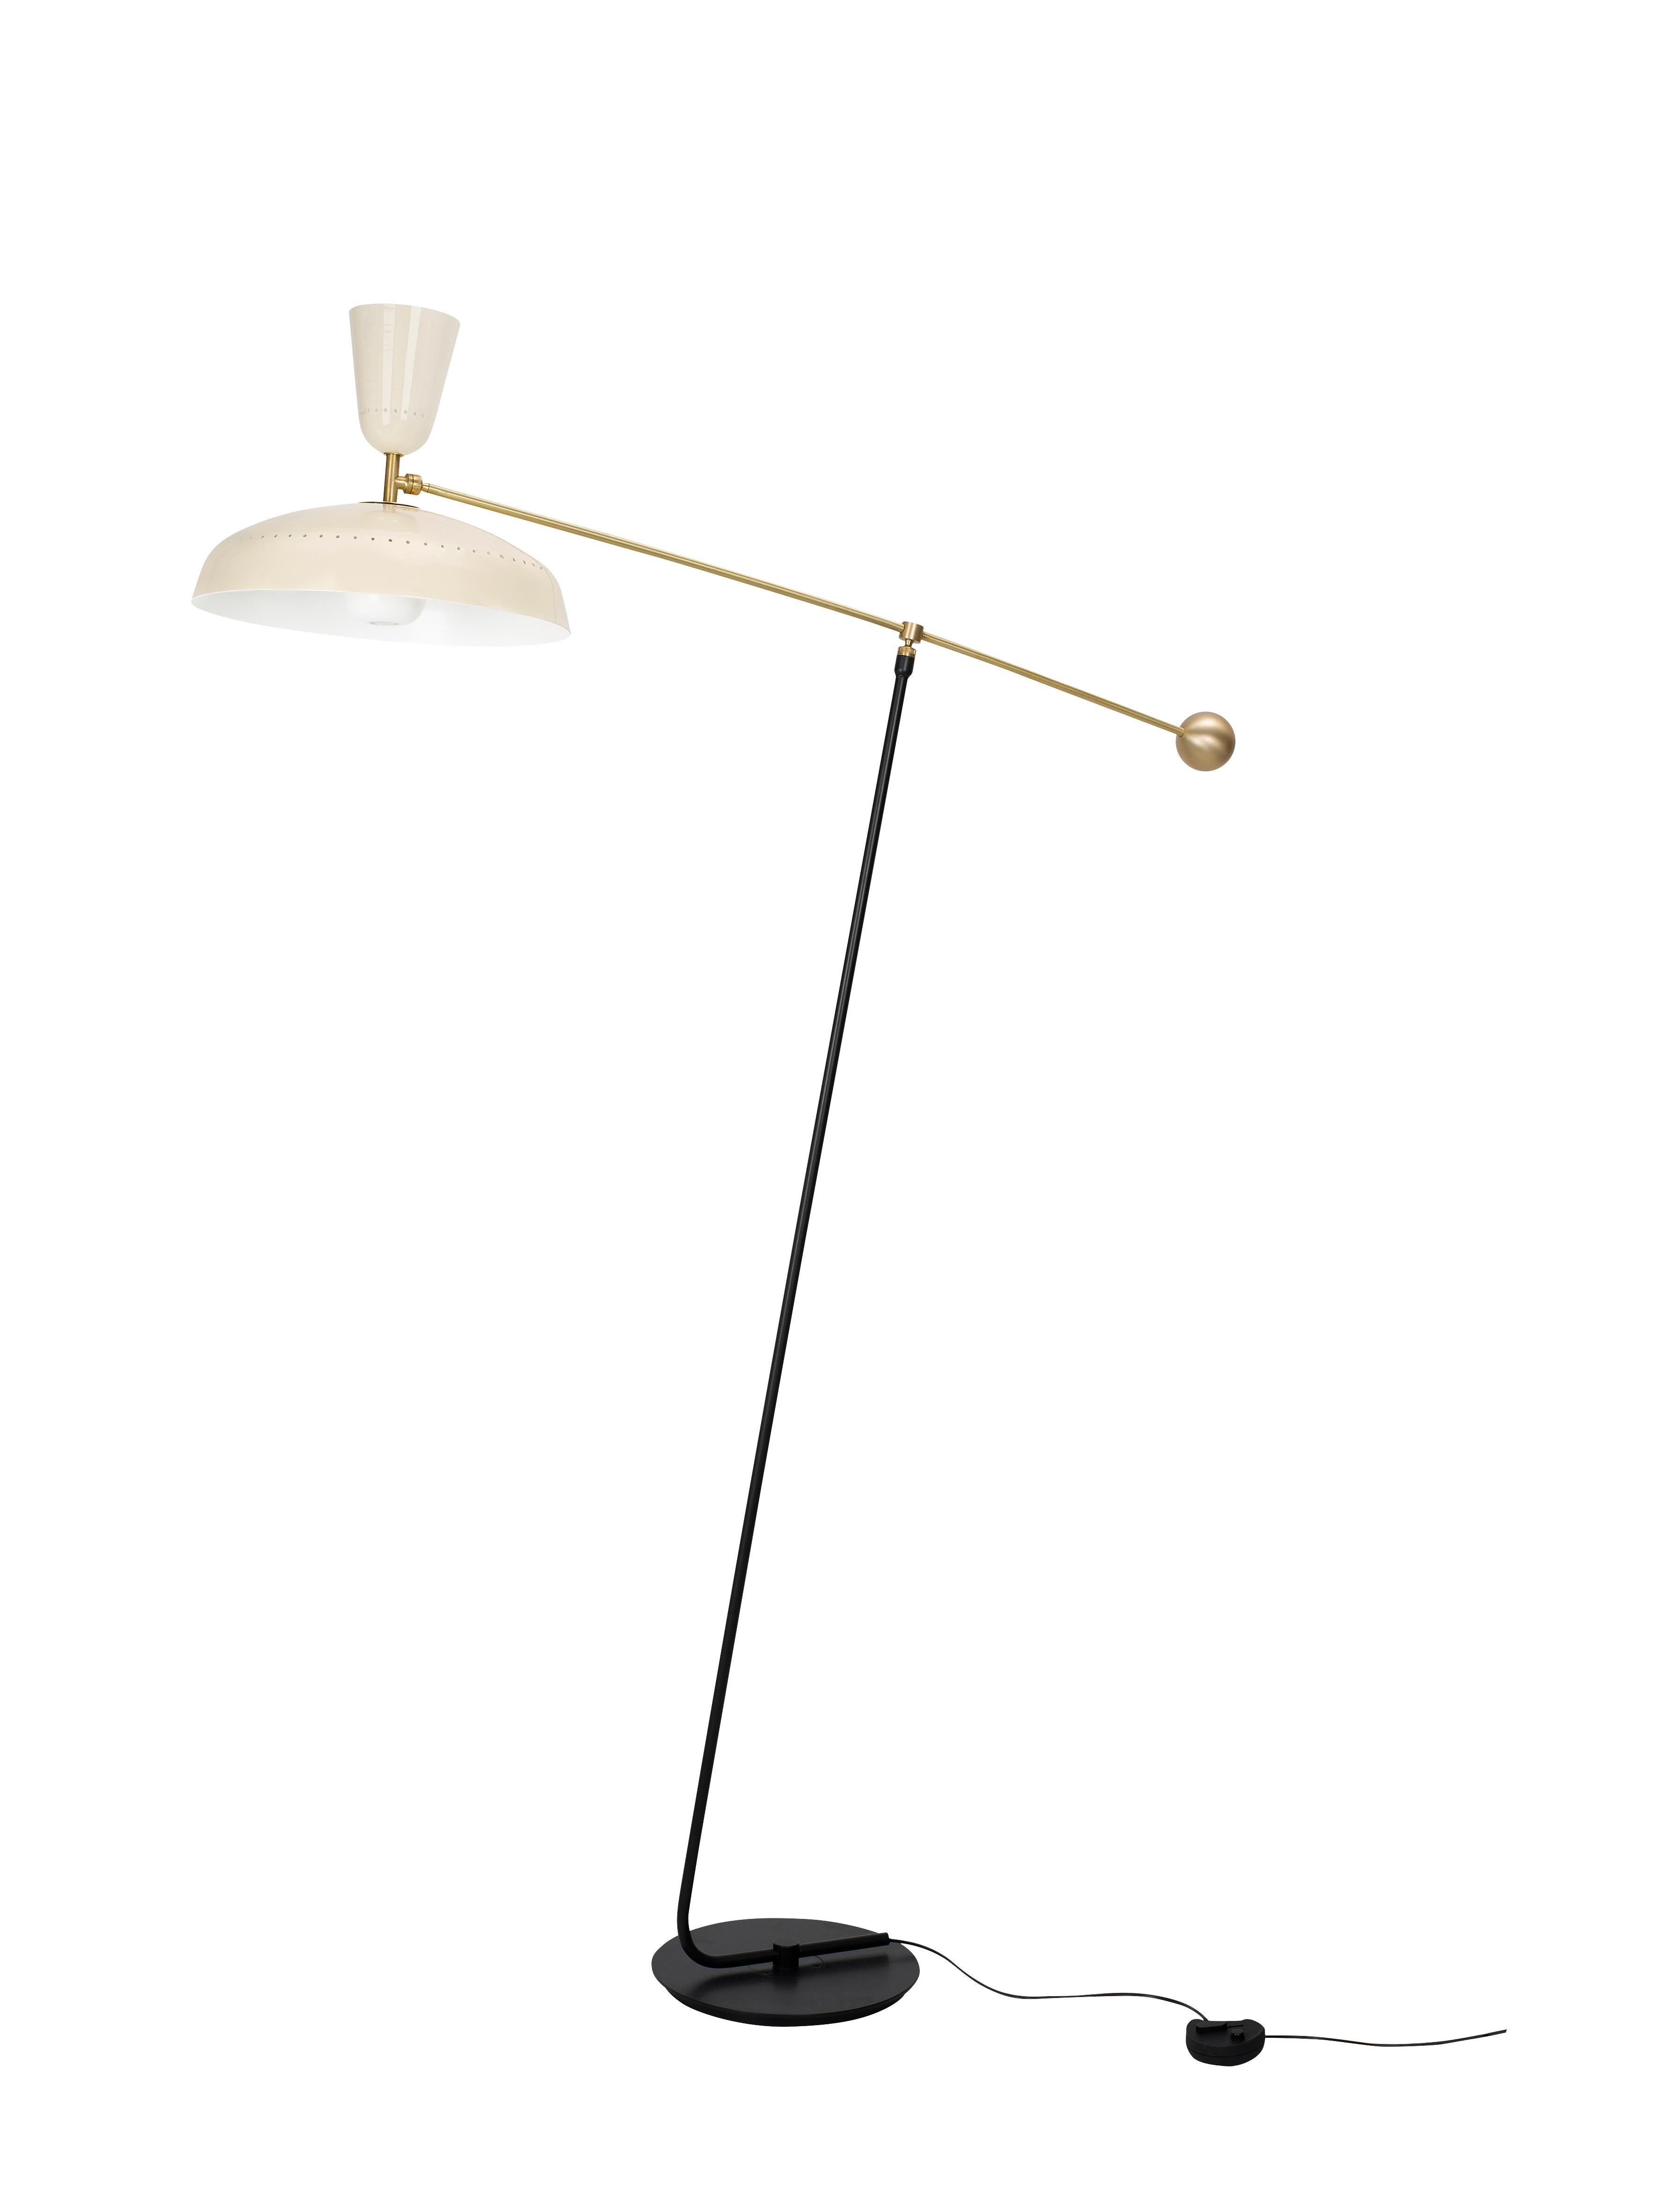 Large Pierre Guariche 'G1' Floor Lamp for Sammode Studio in White For Sale 1